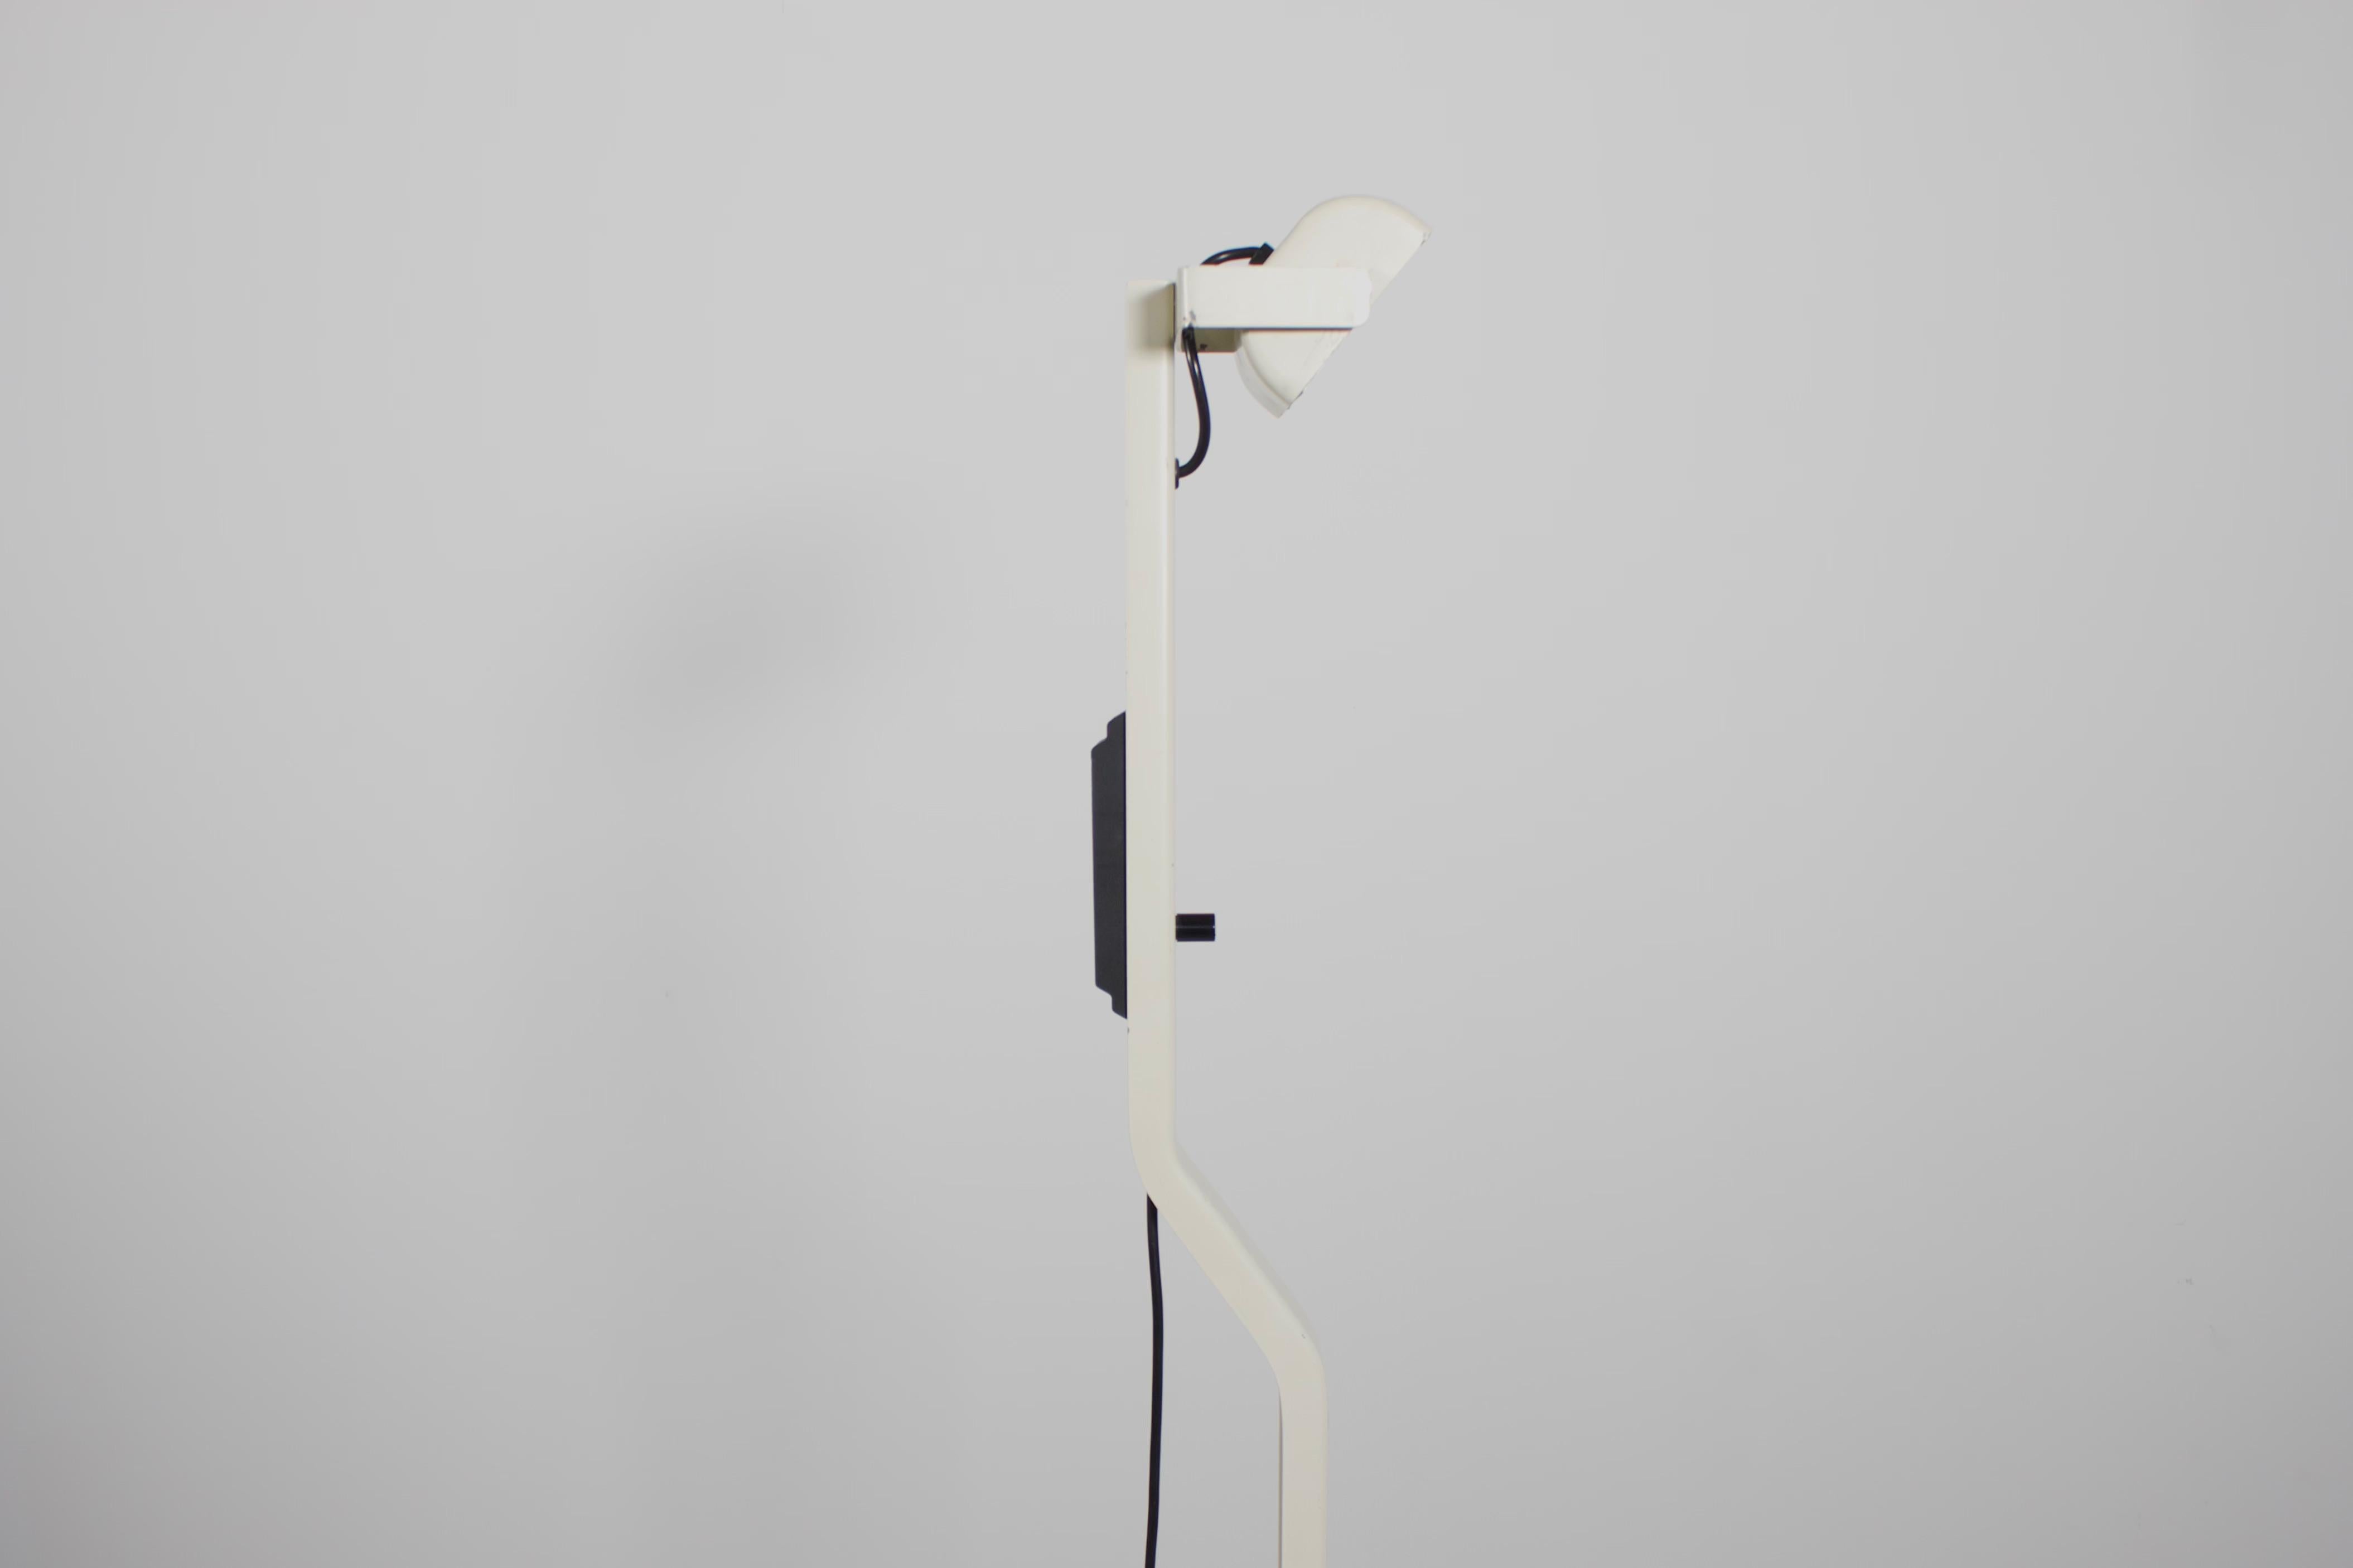 Minimalist ’Sirio’ floor lamp in very good condition.

Designed by Kazuhide Takahama in 1977.

Manufactured by Sirrah Italy.

The 'Sirio' is made from a lacquered metal profile which is bent to act as the stem and the base of the lamp.

It holds a